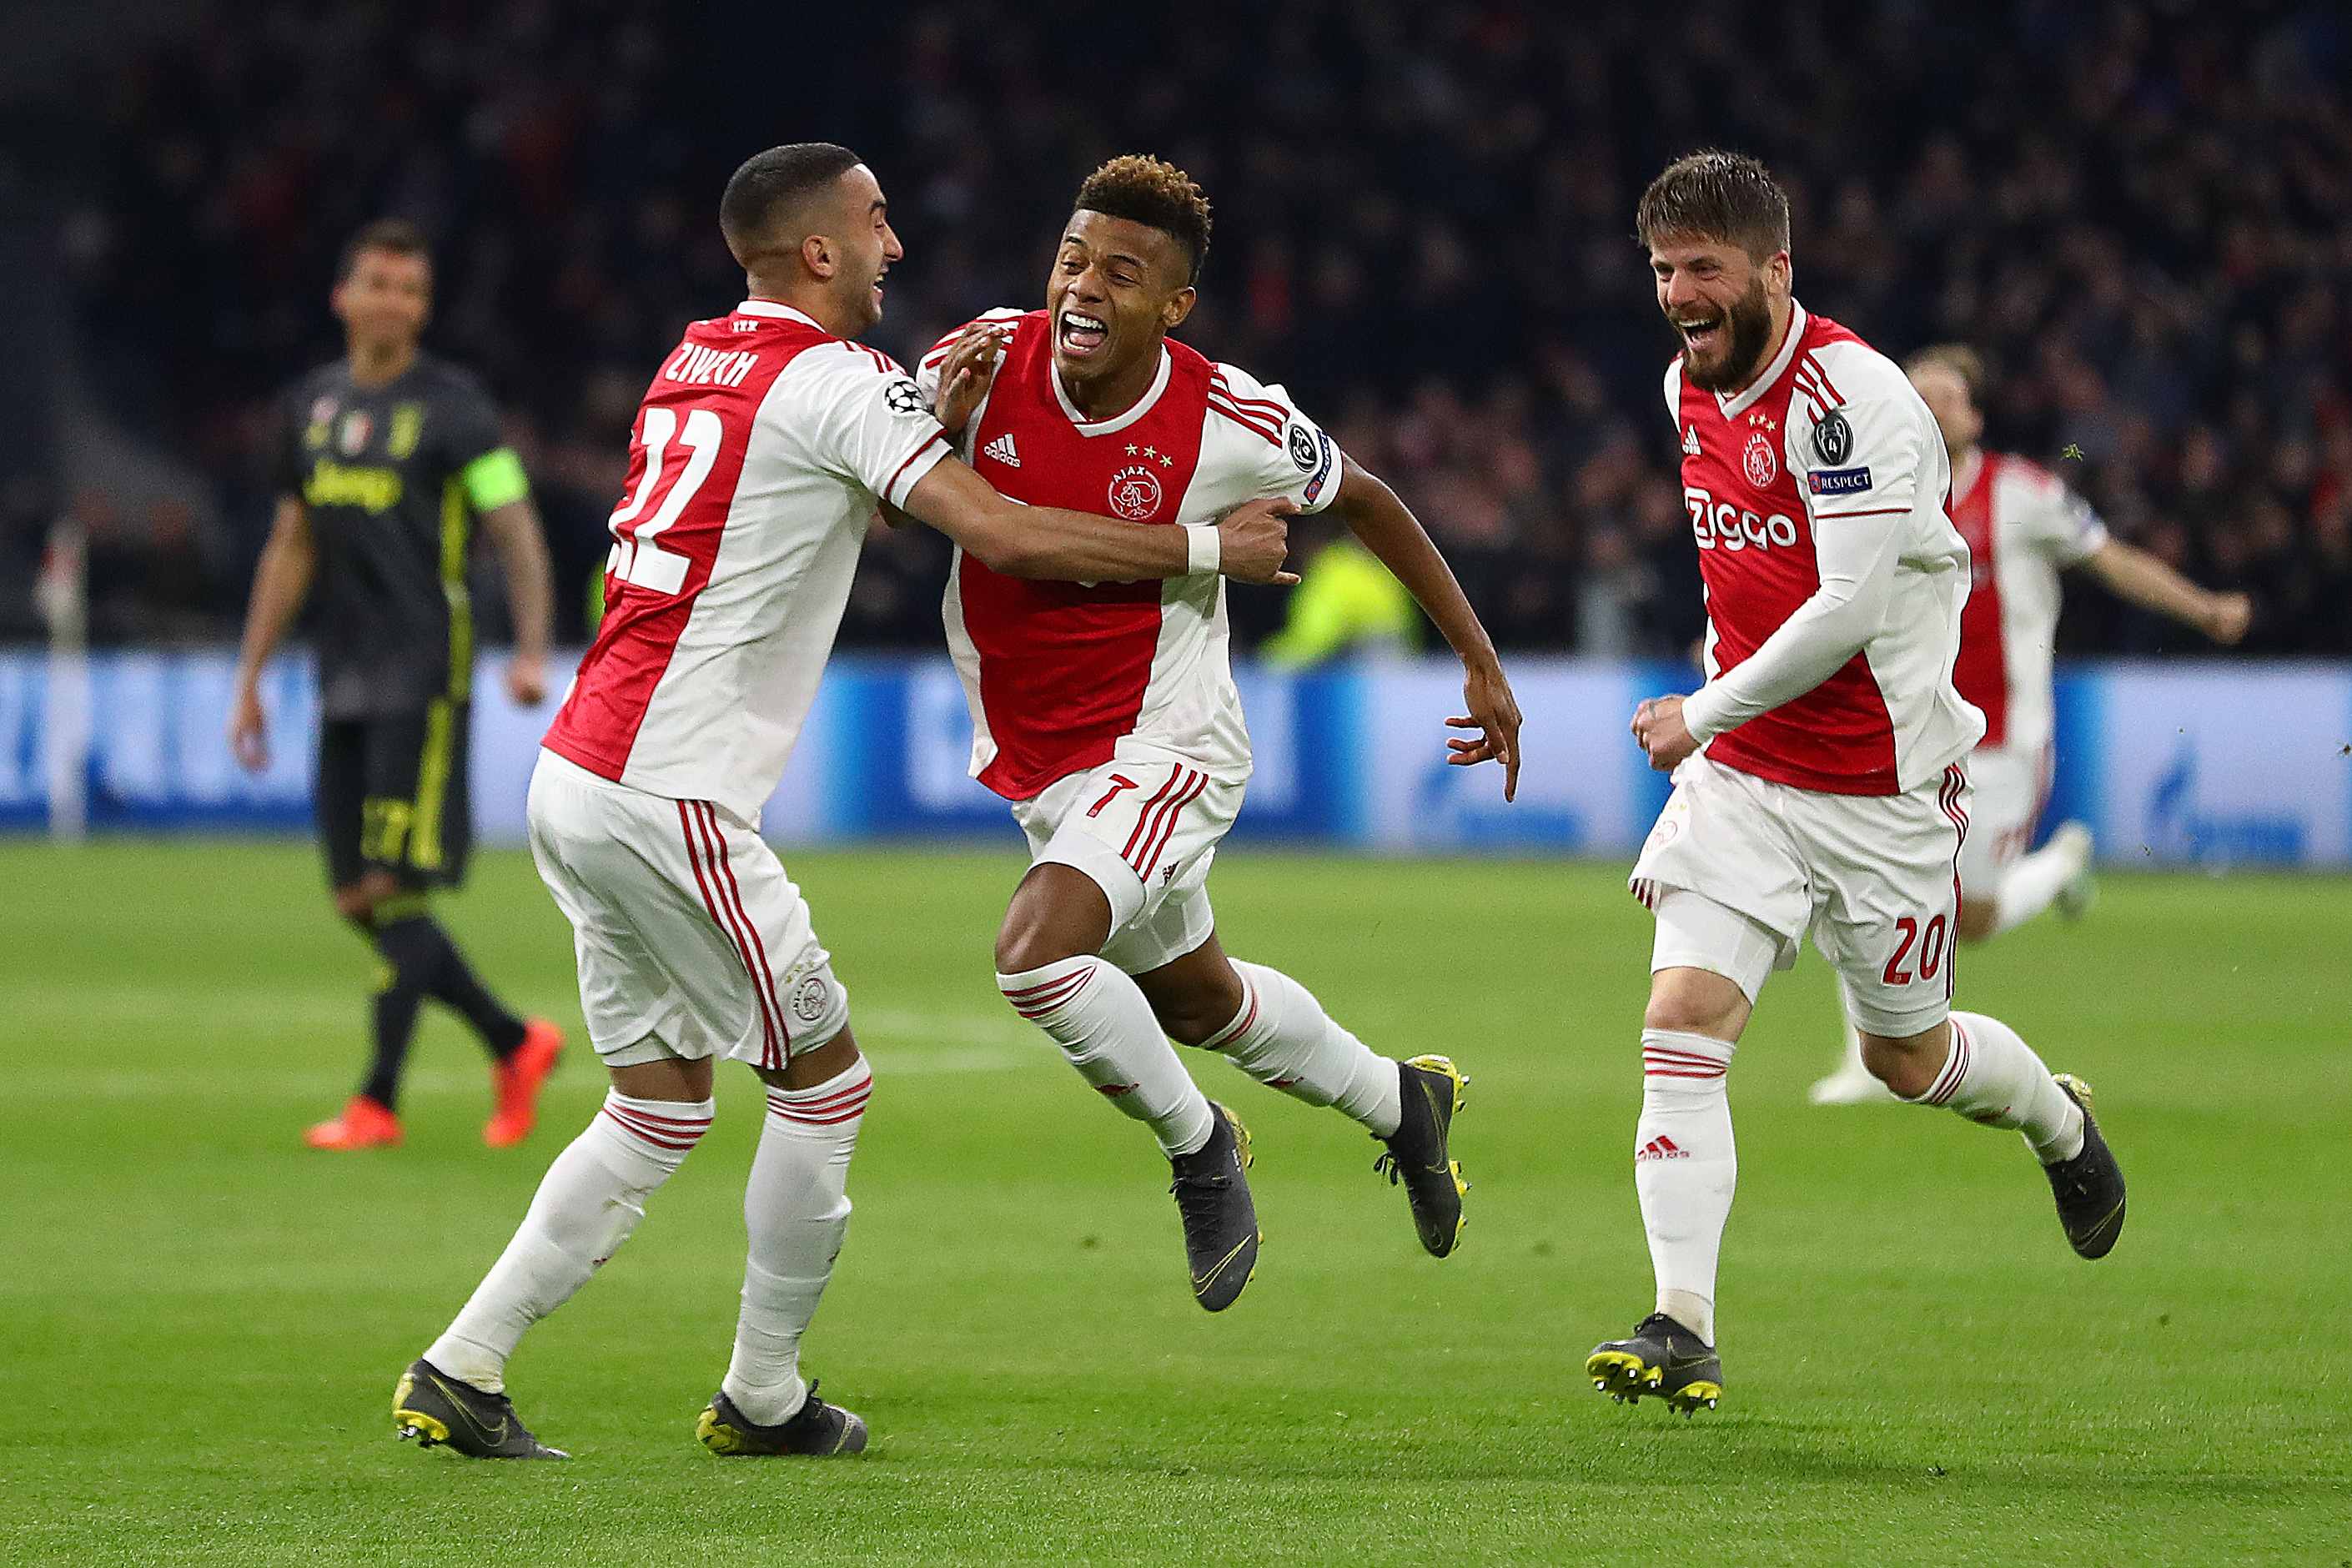 AMSTERDAM, NETHERLANDS - APRIL 10:  David Neres of Ajax celebrates scoring the equalising goal alongside Hakim Ziyech (L) and Lasse Schone (R) during the UEFA Champions League Quarter Final first leg match between Ajax and Juventus at Johan Cruyff Arena on April 10, 2019 in Amsterdam, Netherlands. (Photo by Michael Steele/Getty Images)